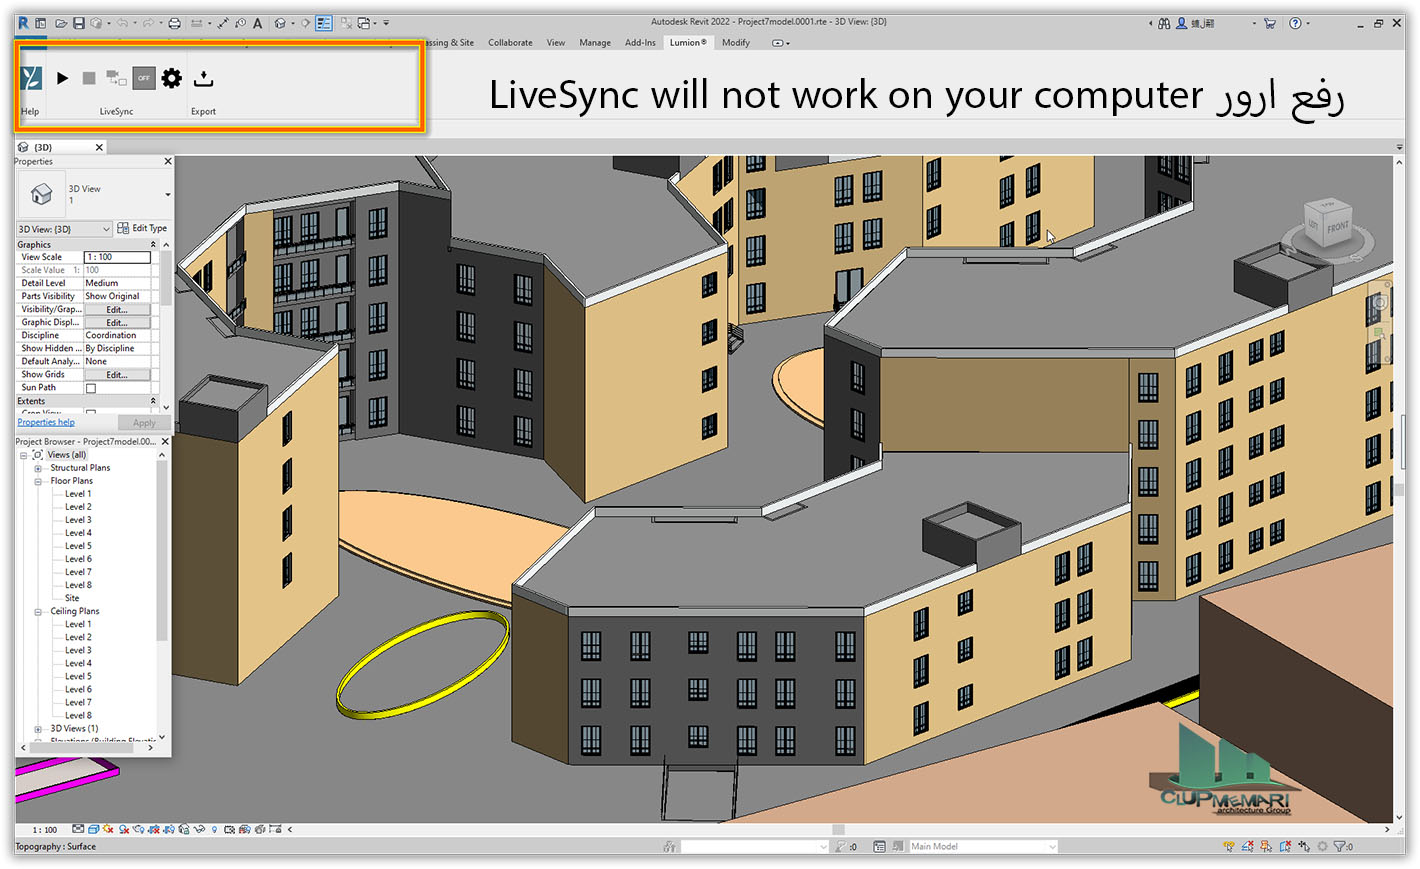 LiveSync will not work on your computer